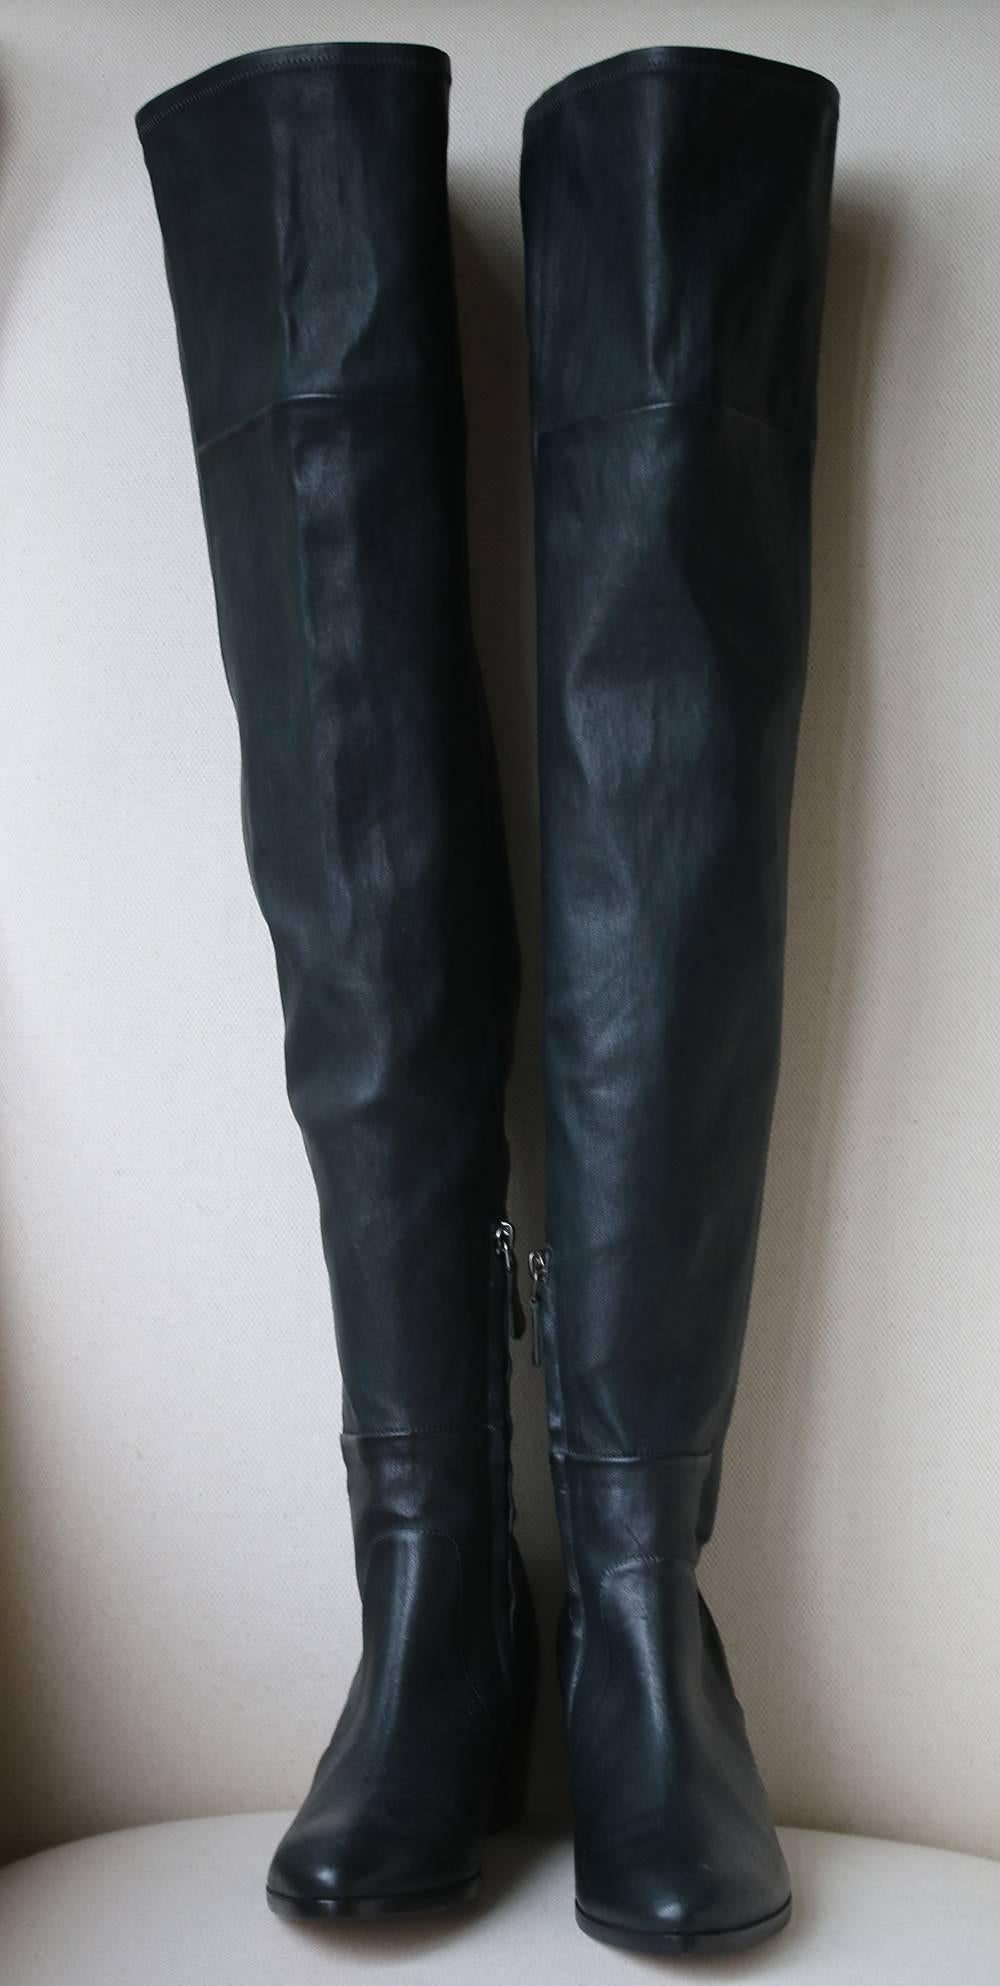 Chanel dark green stretch-leather over-the-knee heeled boots featuring a metal 'CC' logo on the heel. Pulls on.

Size: EU 38 (UK 5, US 8)

Condition: New without box. 

Please note: These boots do not come with their dustbag or box. 